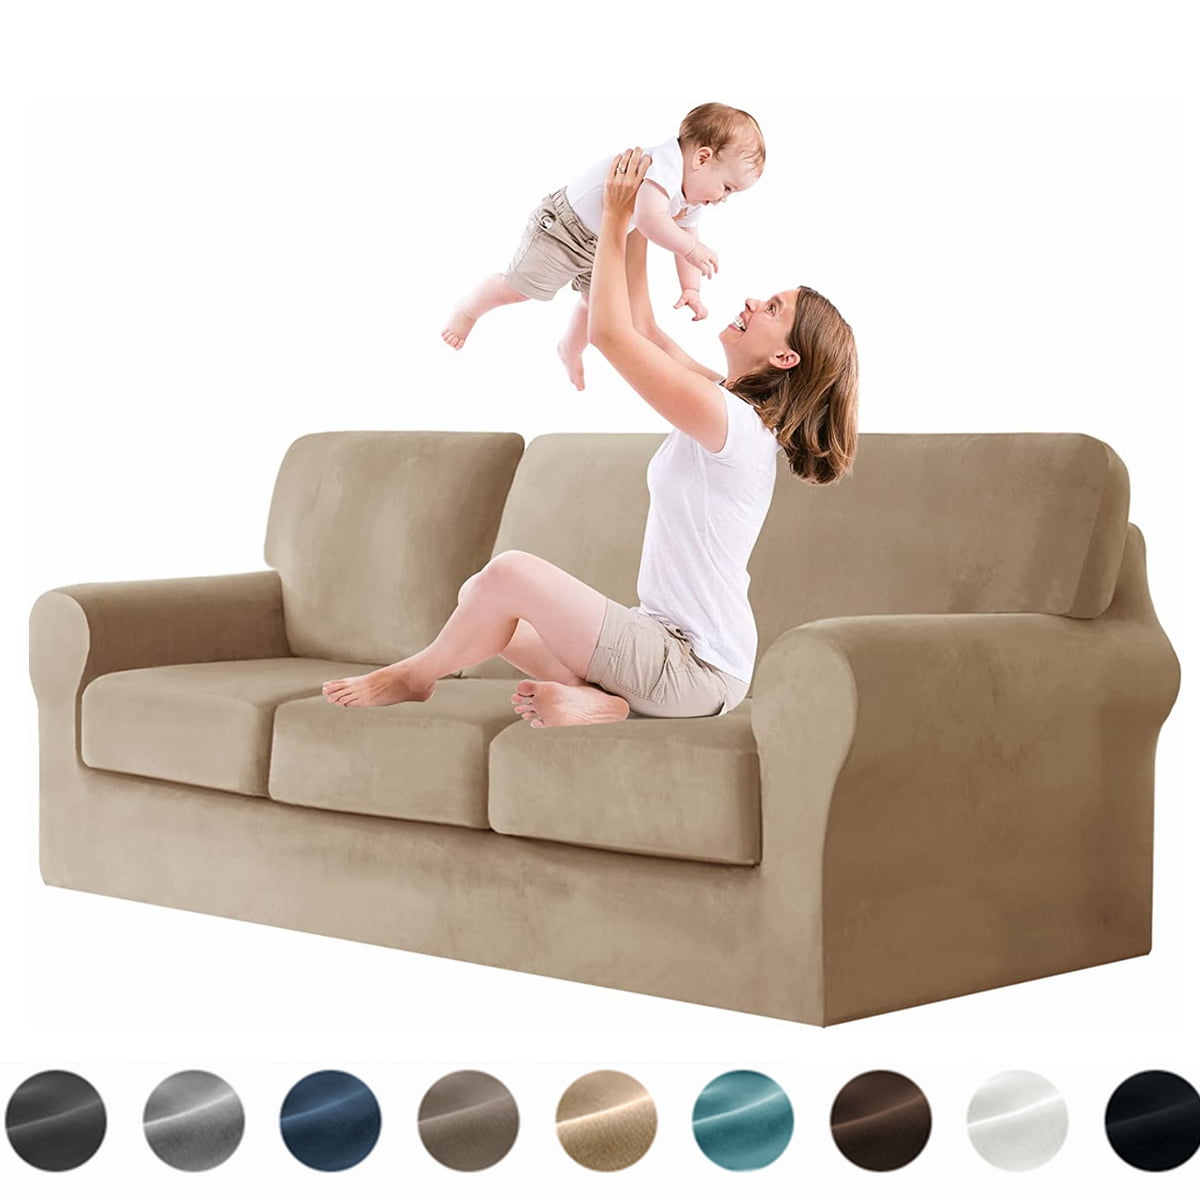 Couch Cushion Grip Design Not Pilling Soft Sofa Stretch Furniture